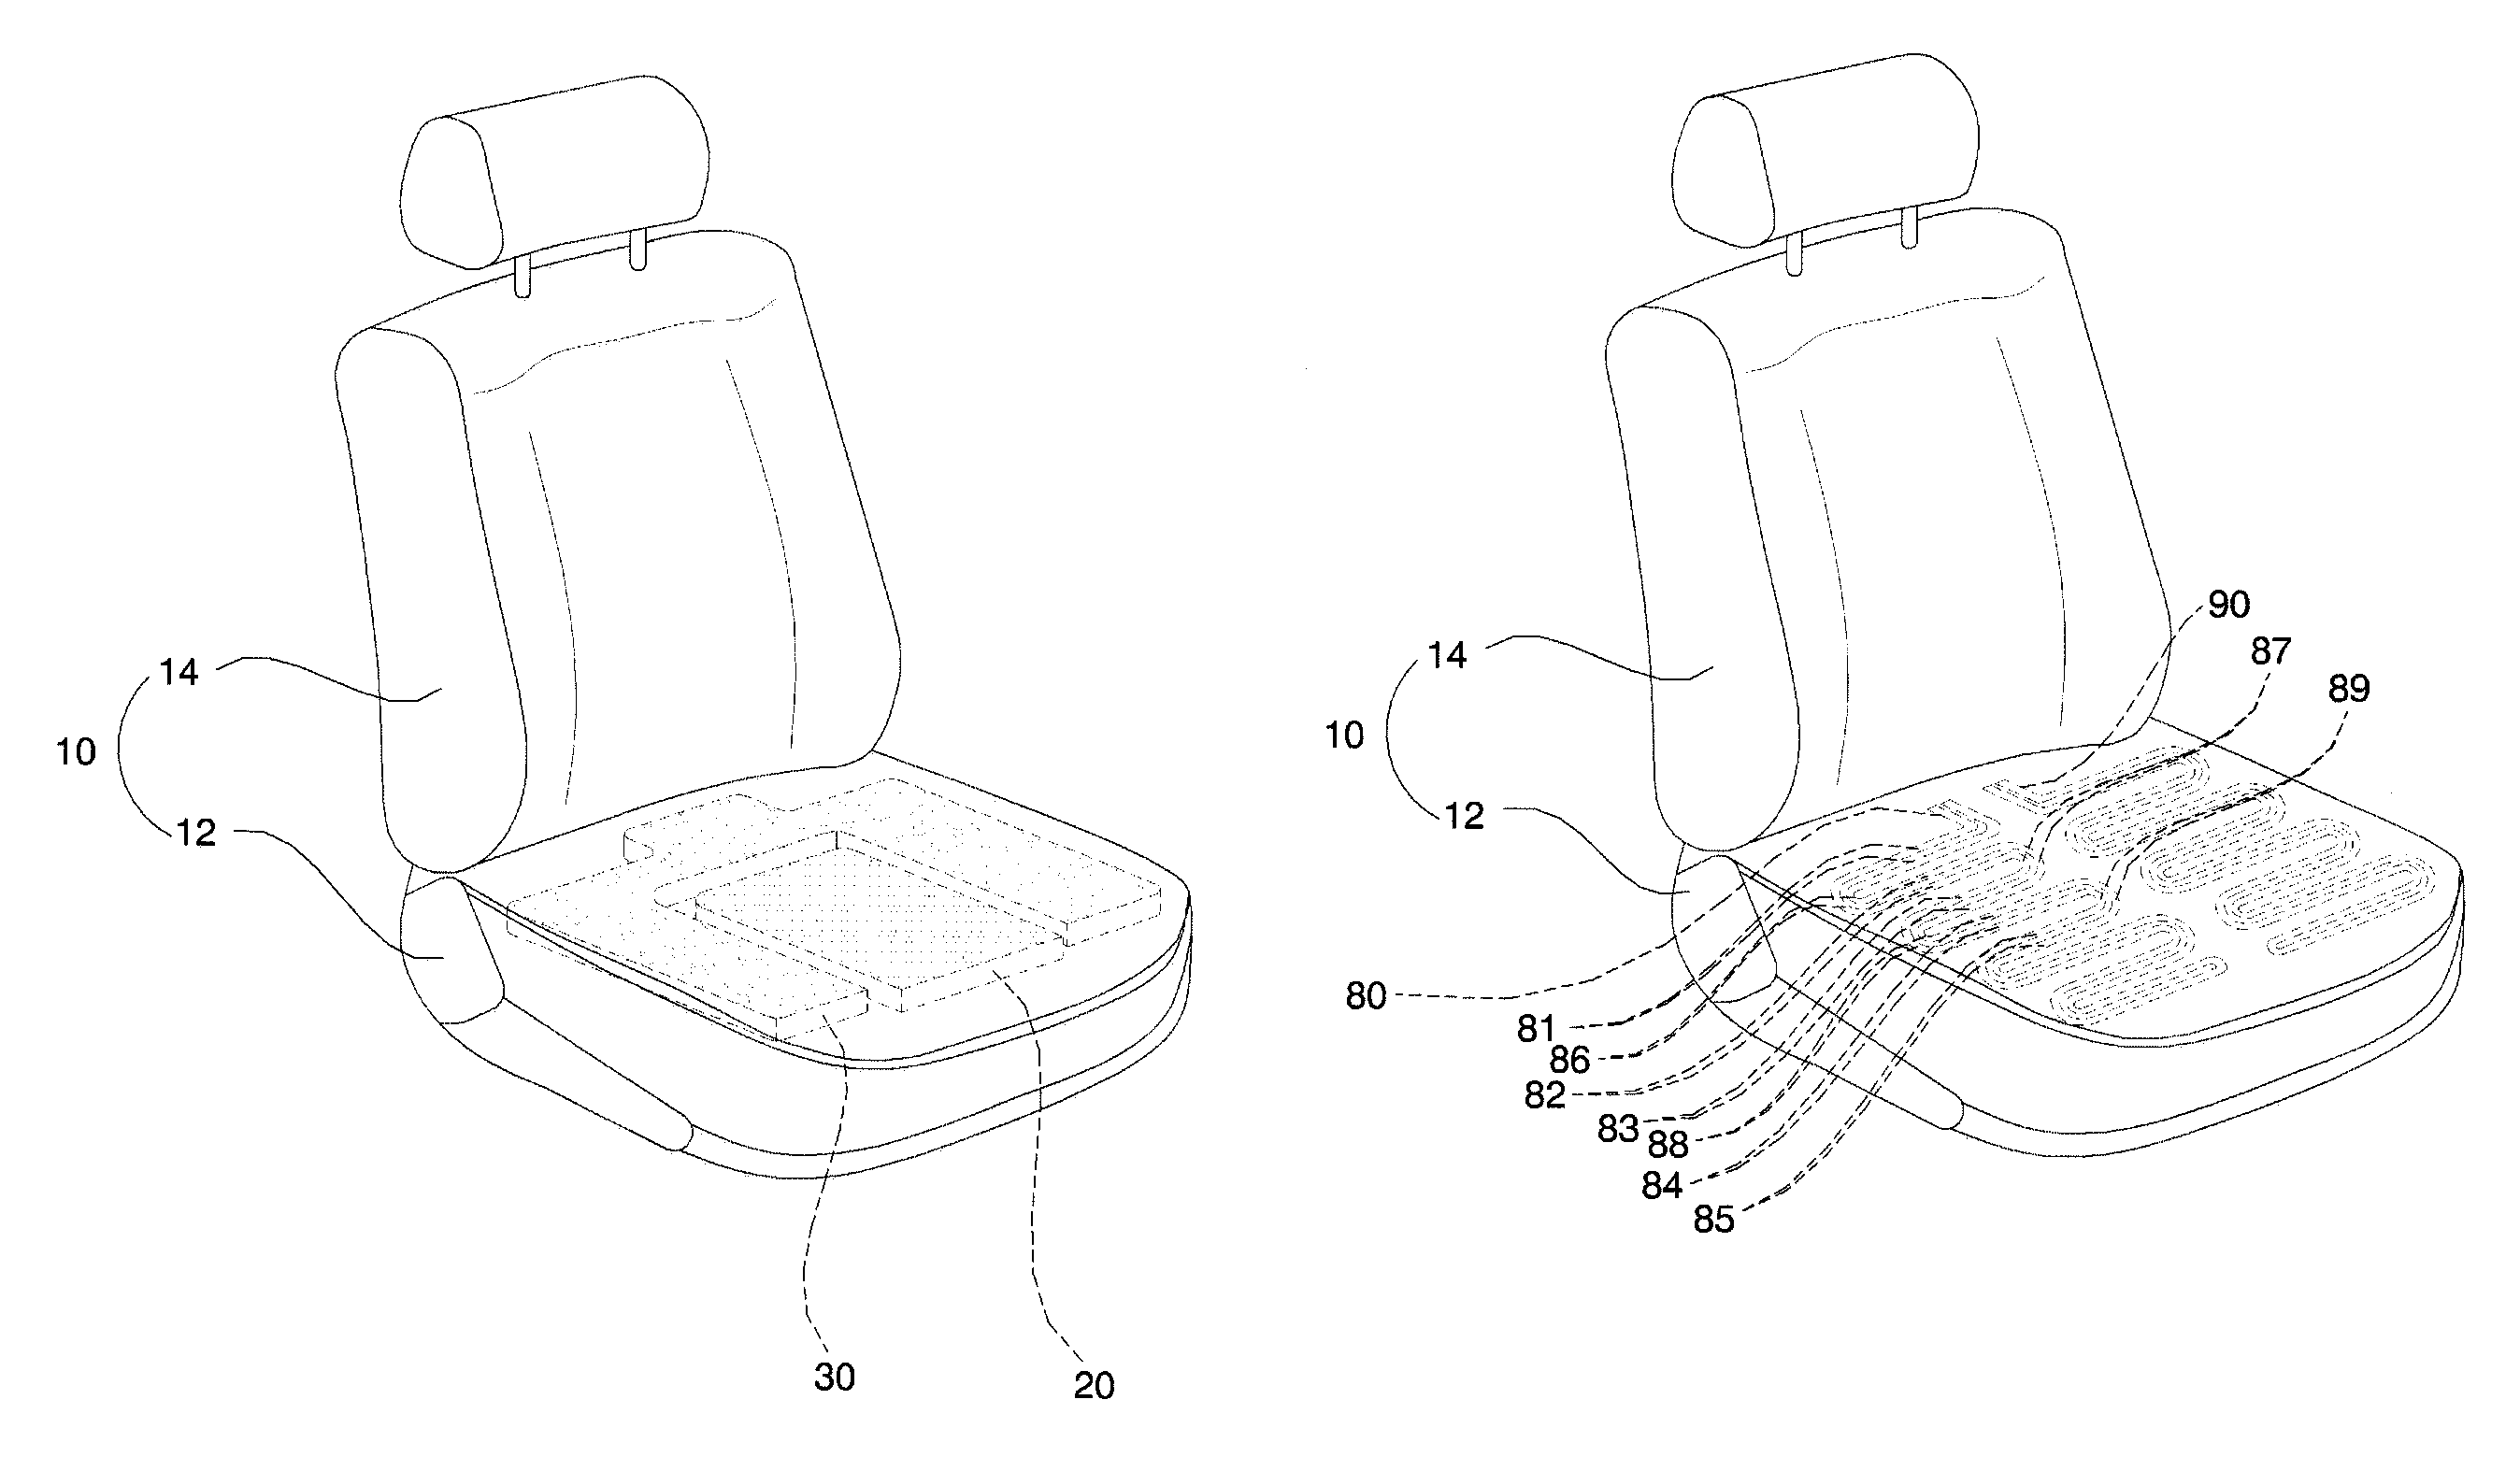 Occupant classifying device for an automobile